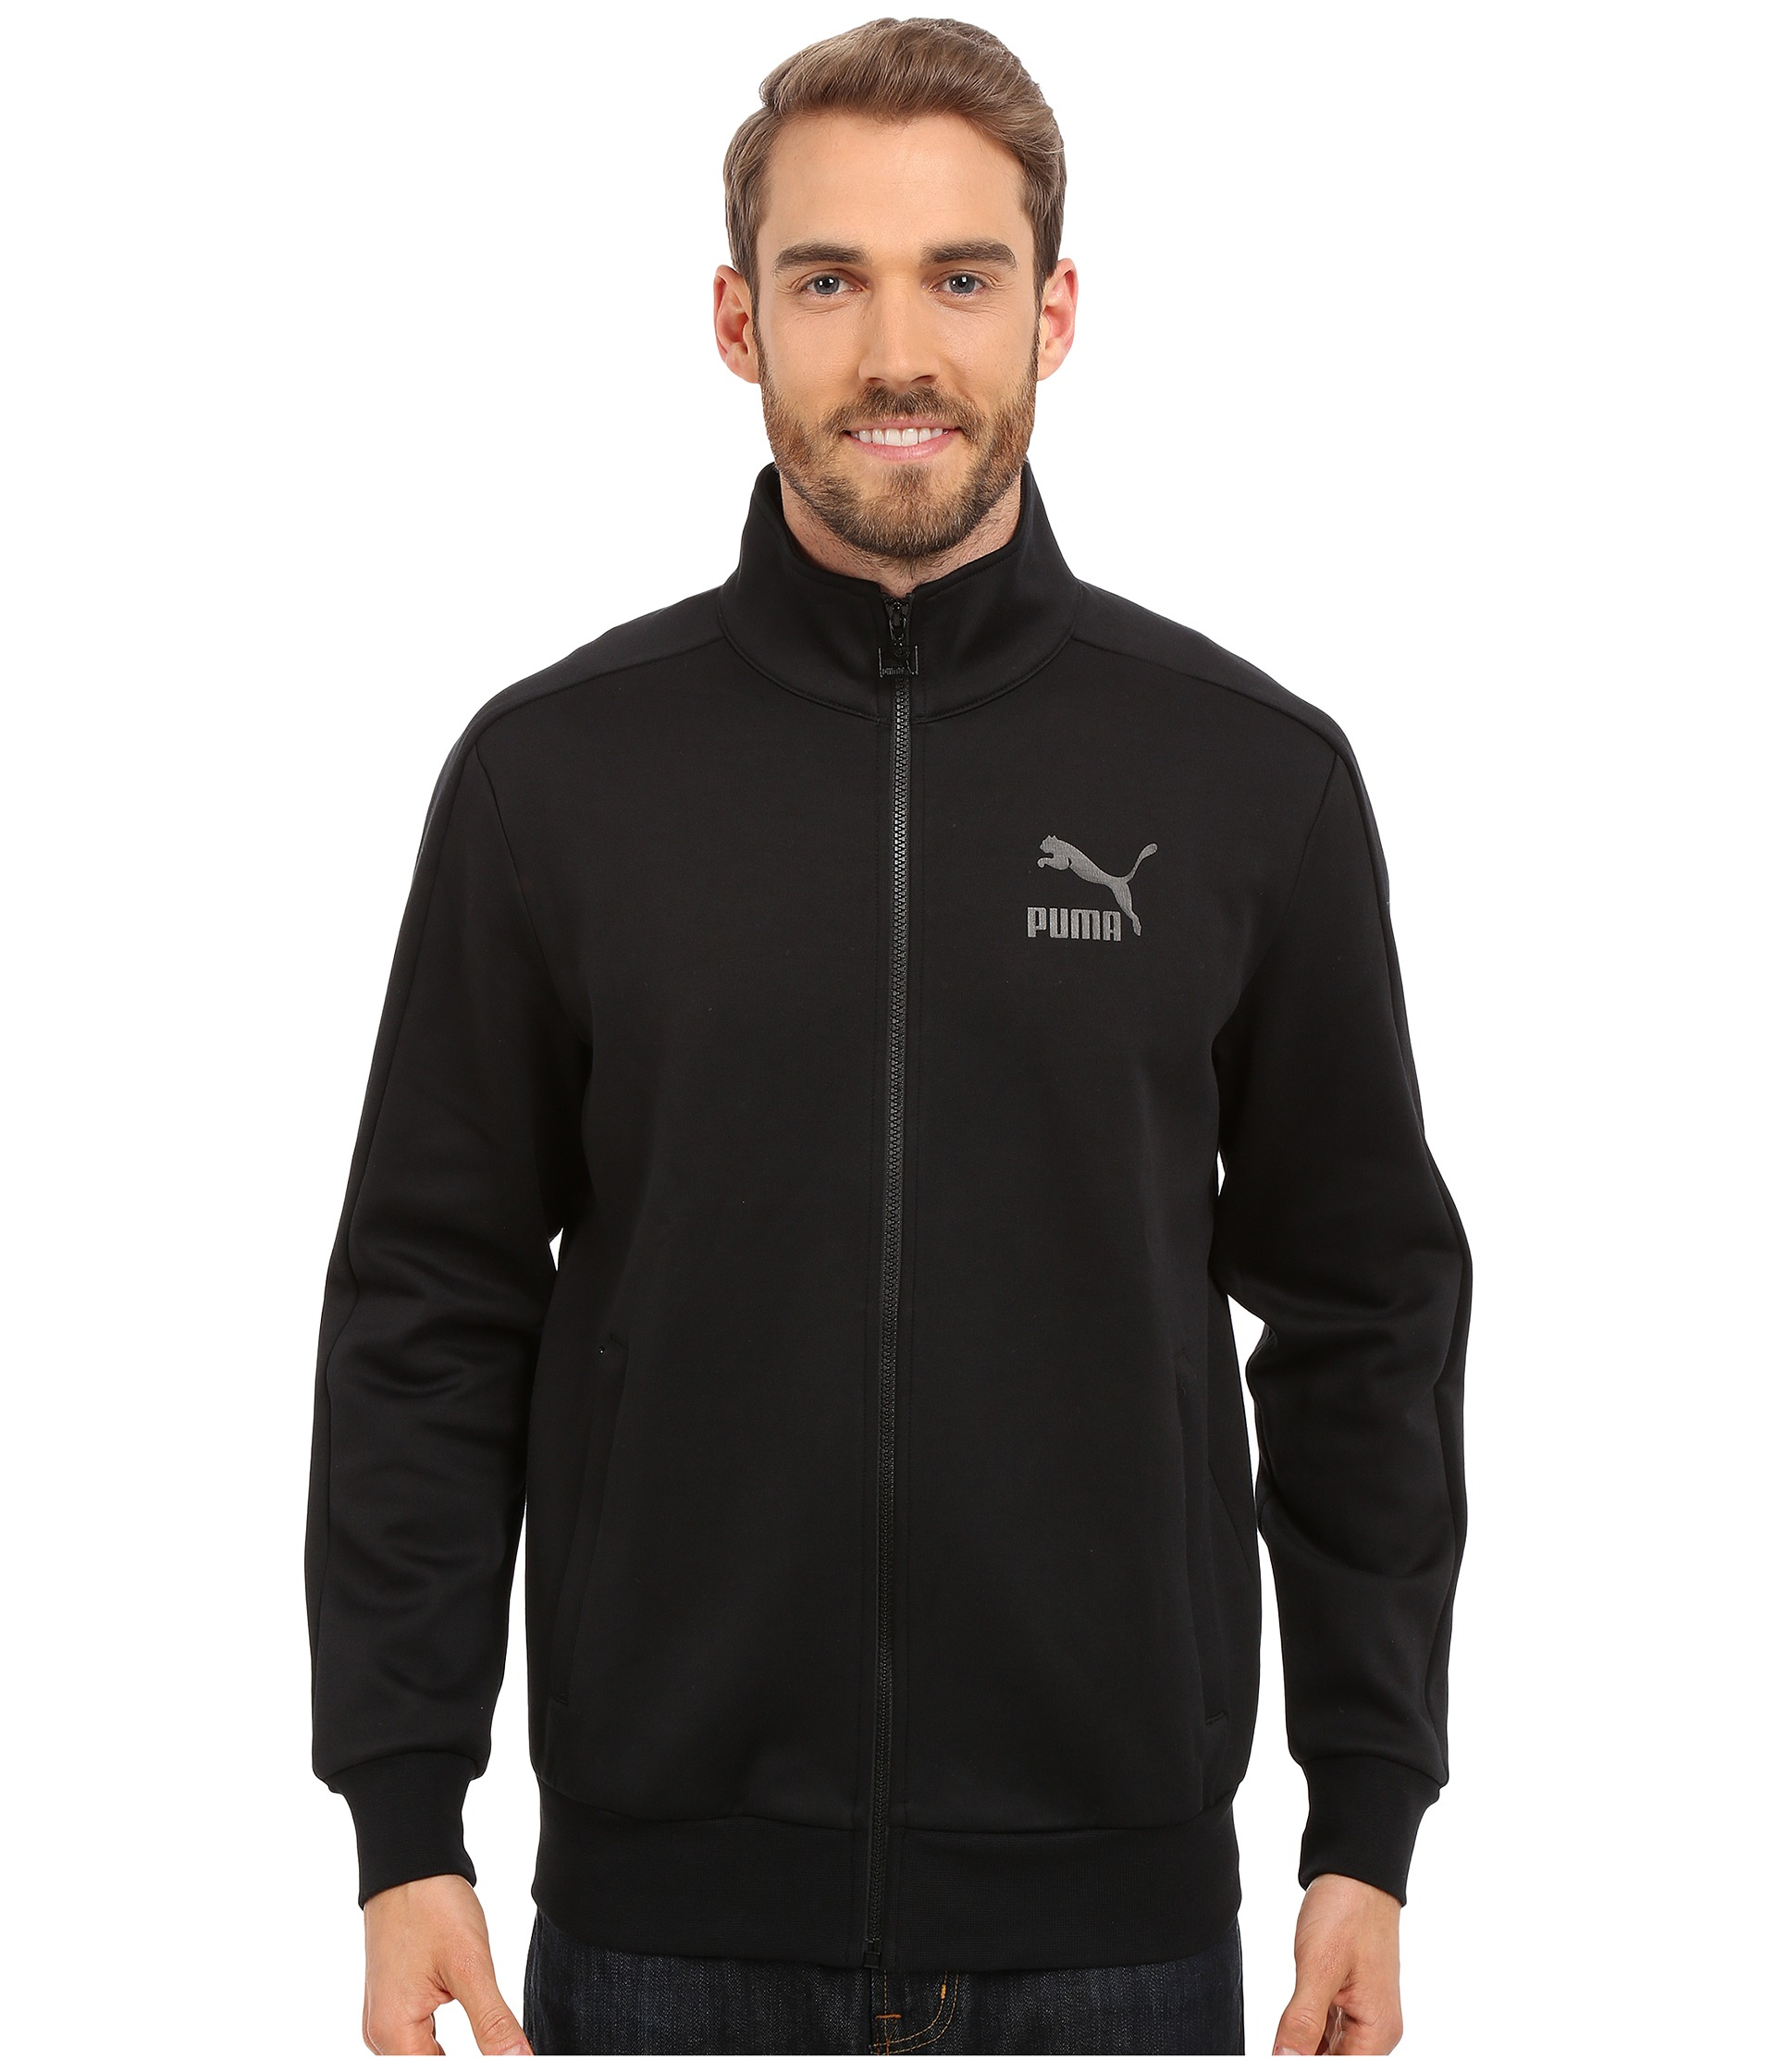 PUMA Cotton Archive T7 Track Jacket in Black for Men - Lyst